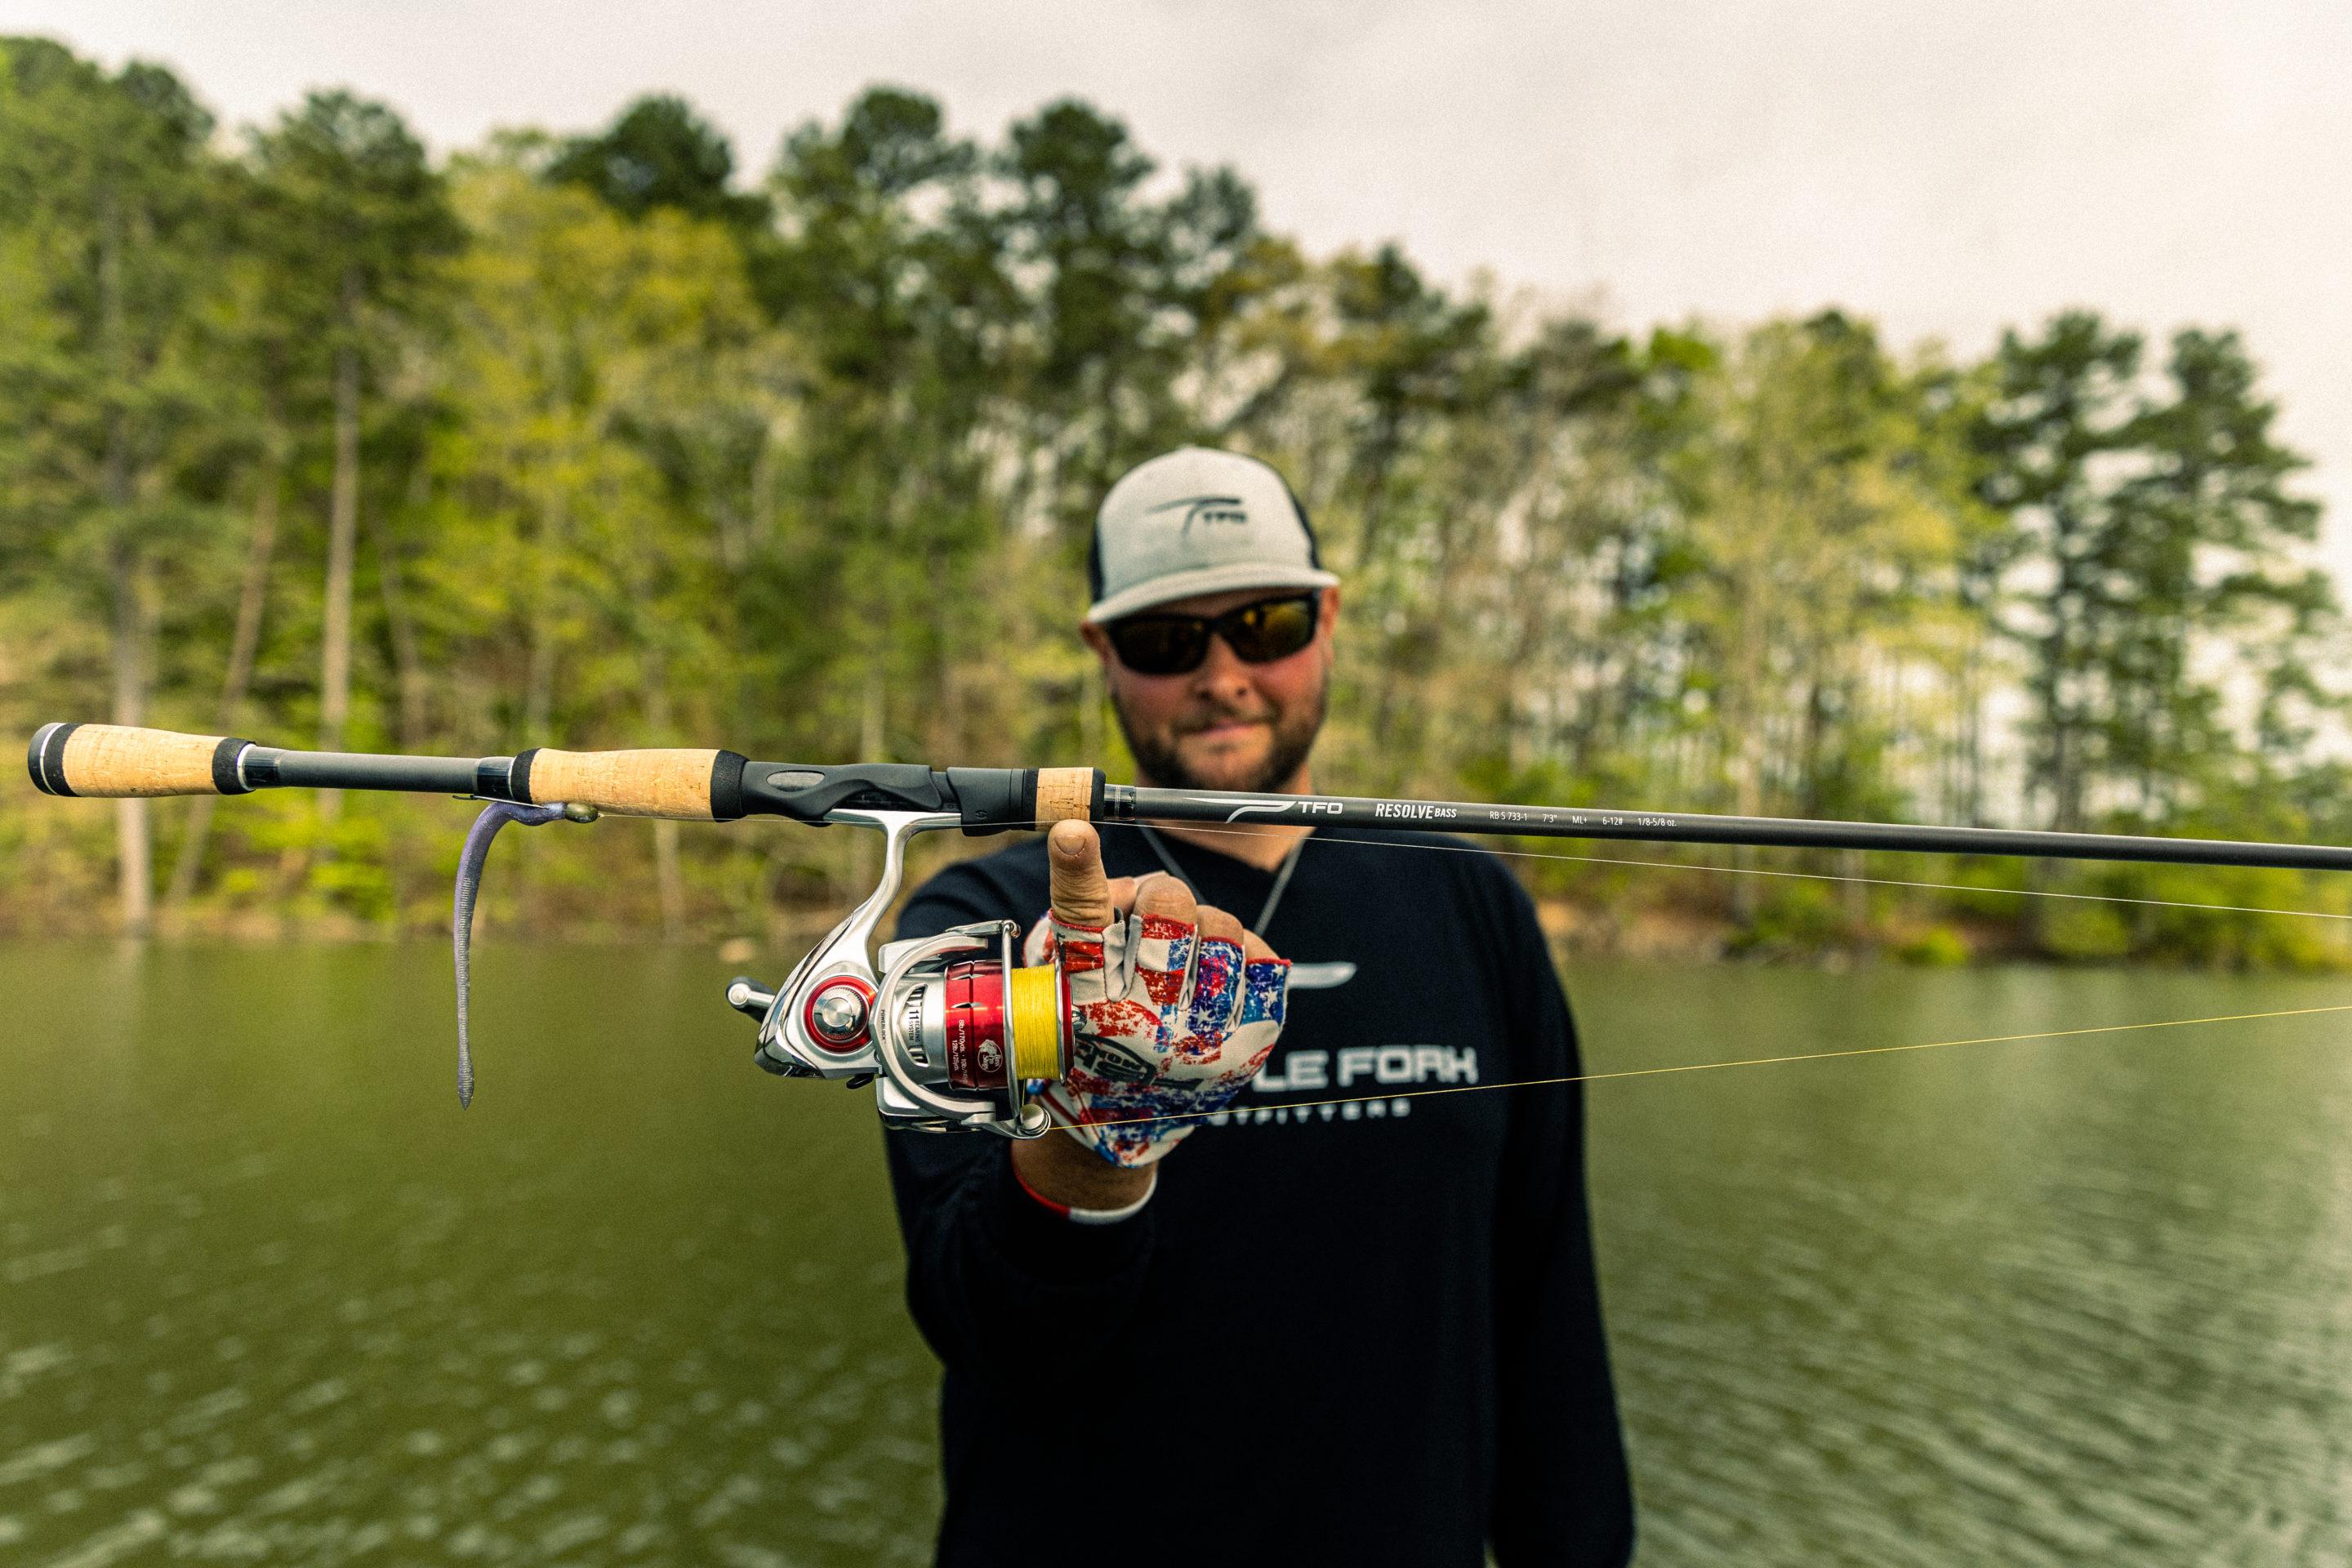 Spring Buyer's Guide: Budget Rods and Reels For Bass Fishing